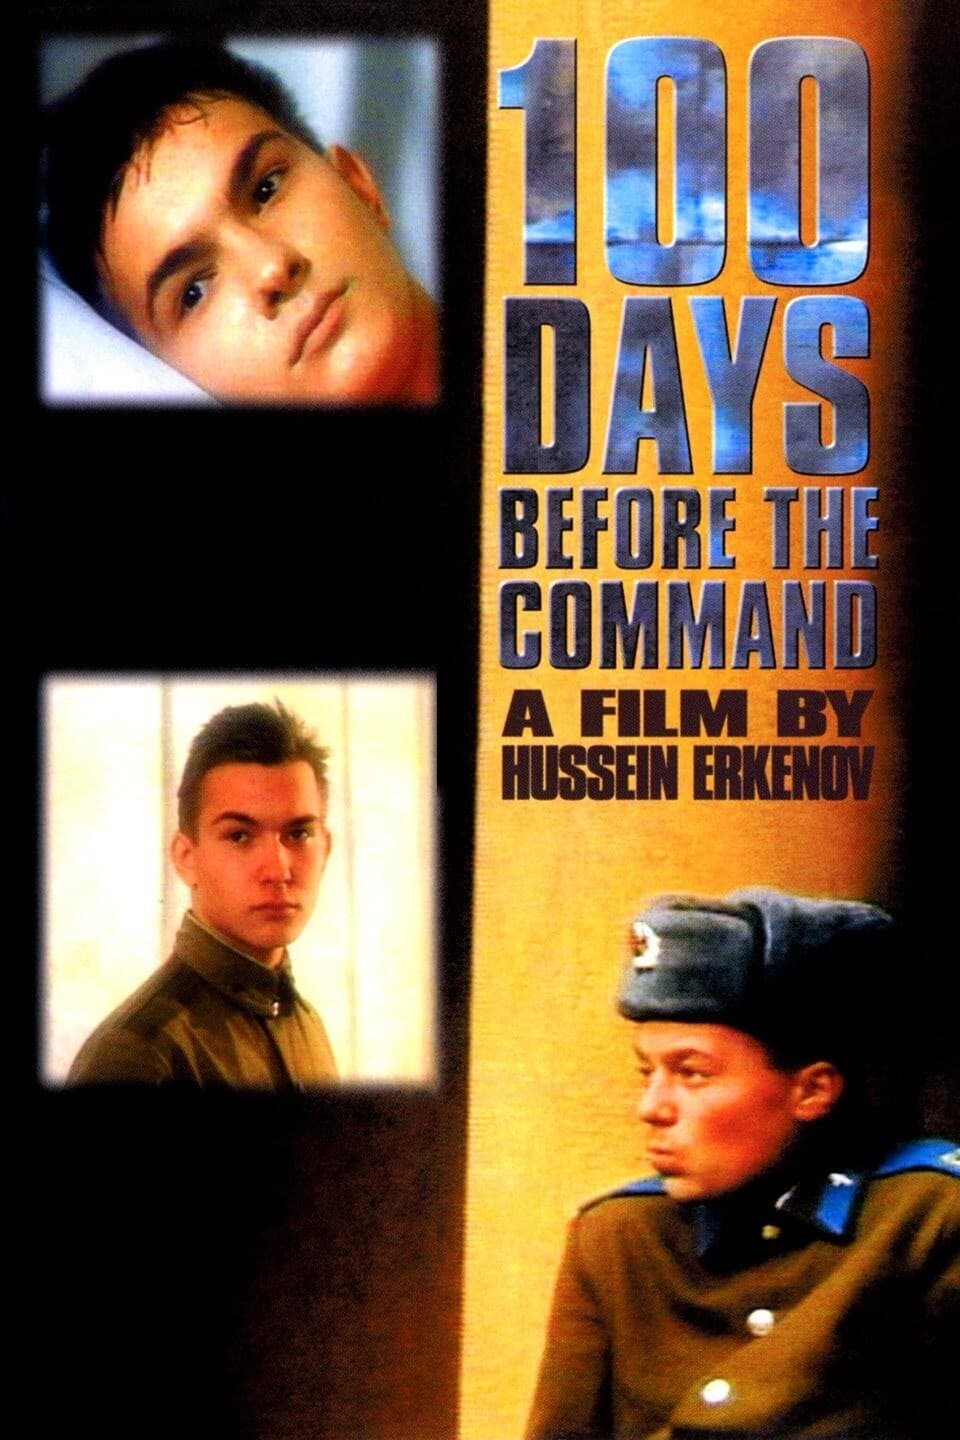 100 Days Before the Command (1991)